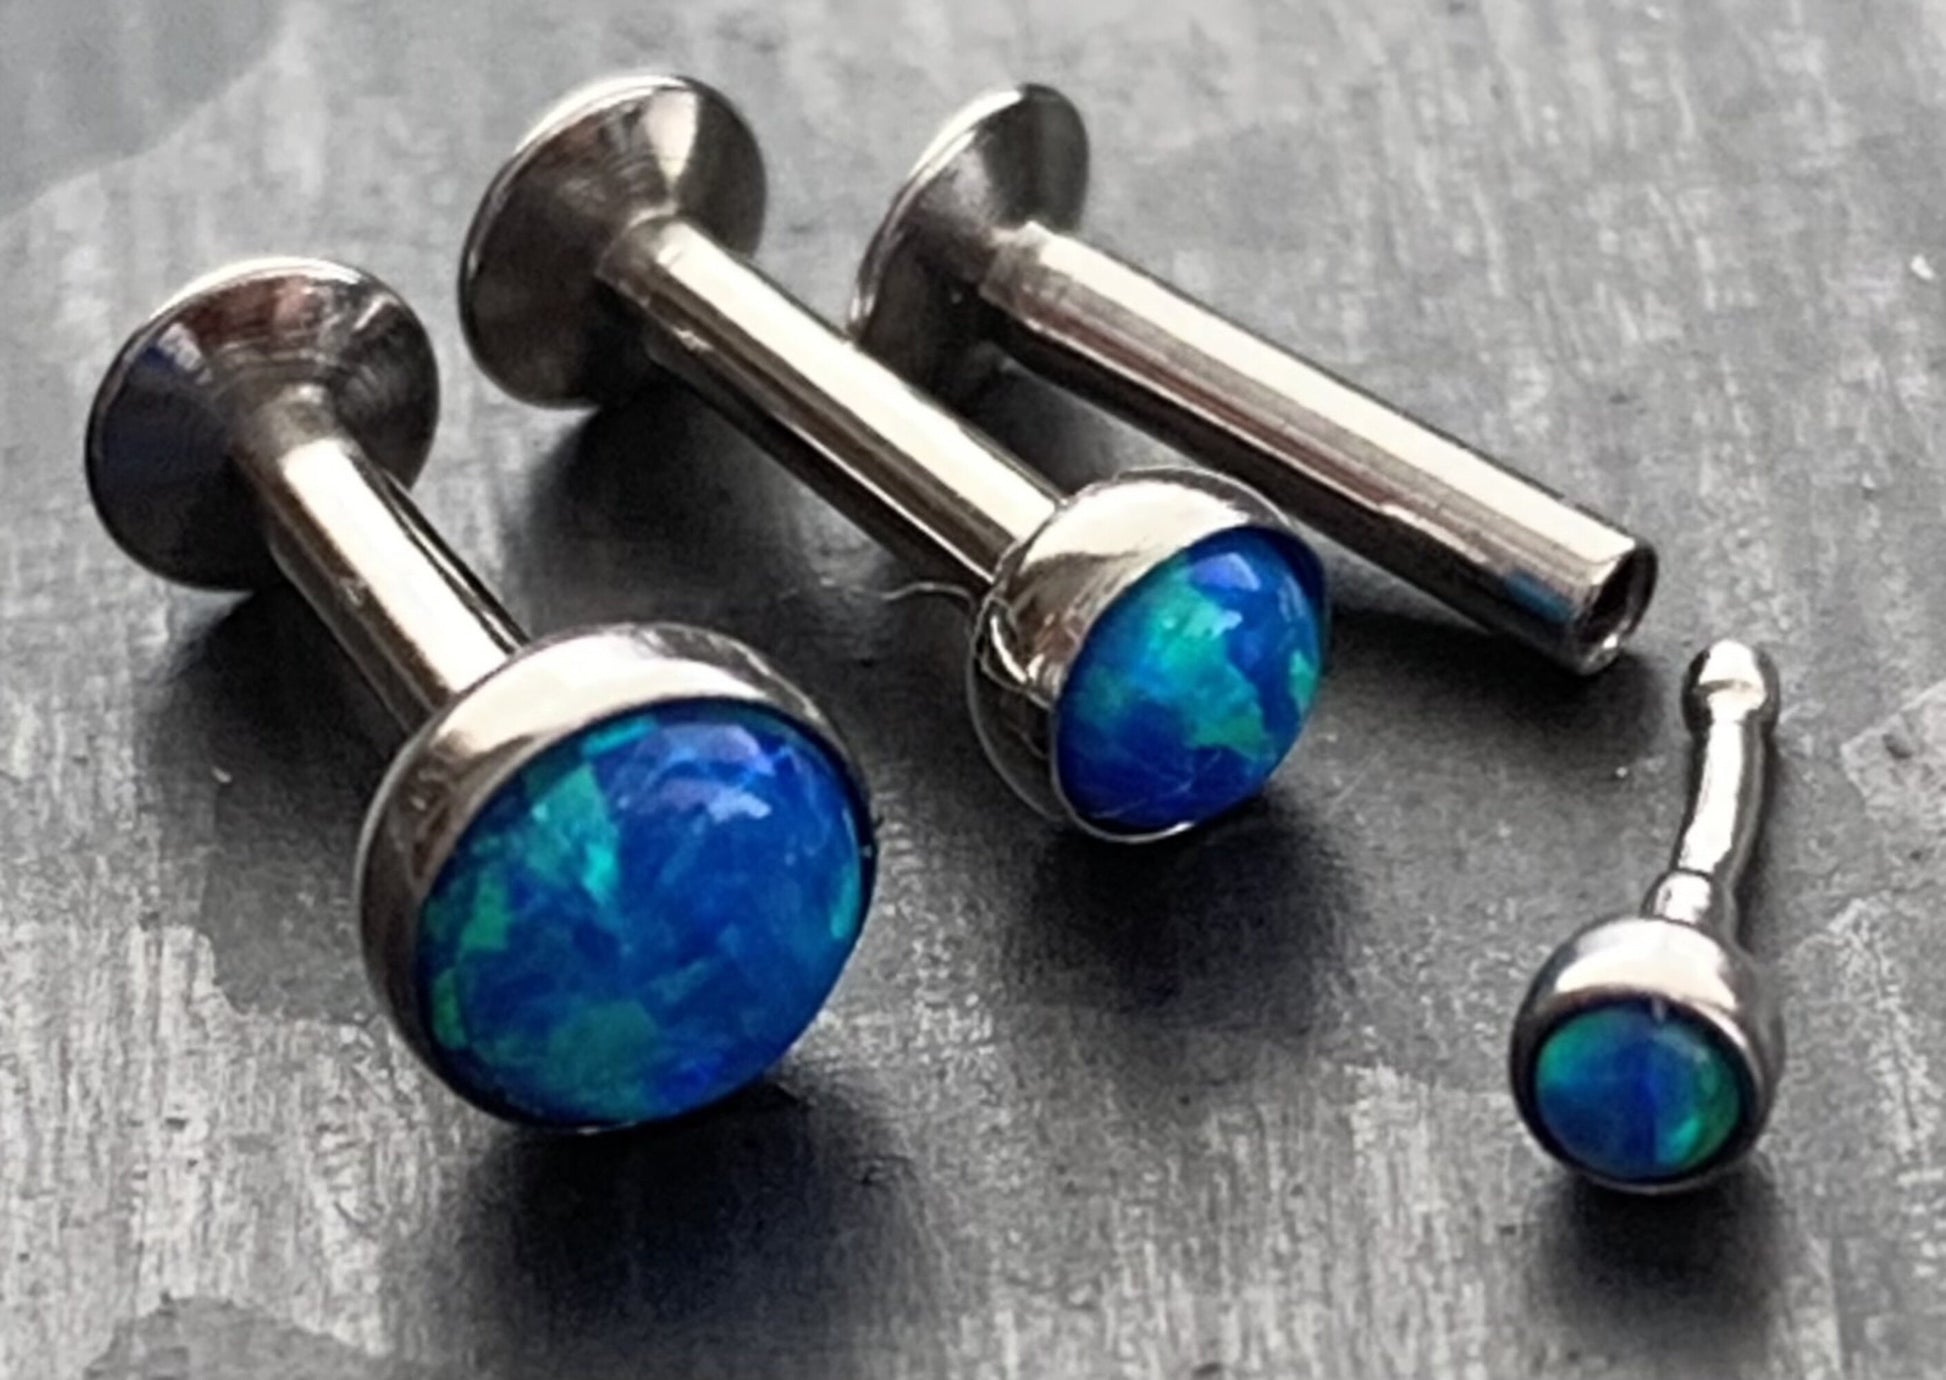 1 Piece Unique Push In Opal Dome Labret Monroe Stud Lip Ring- 16g - Length: 6mm or 8mm - Gem Size 2, 3 or 4mm - White or Blue Available!